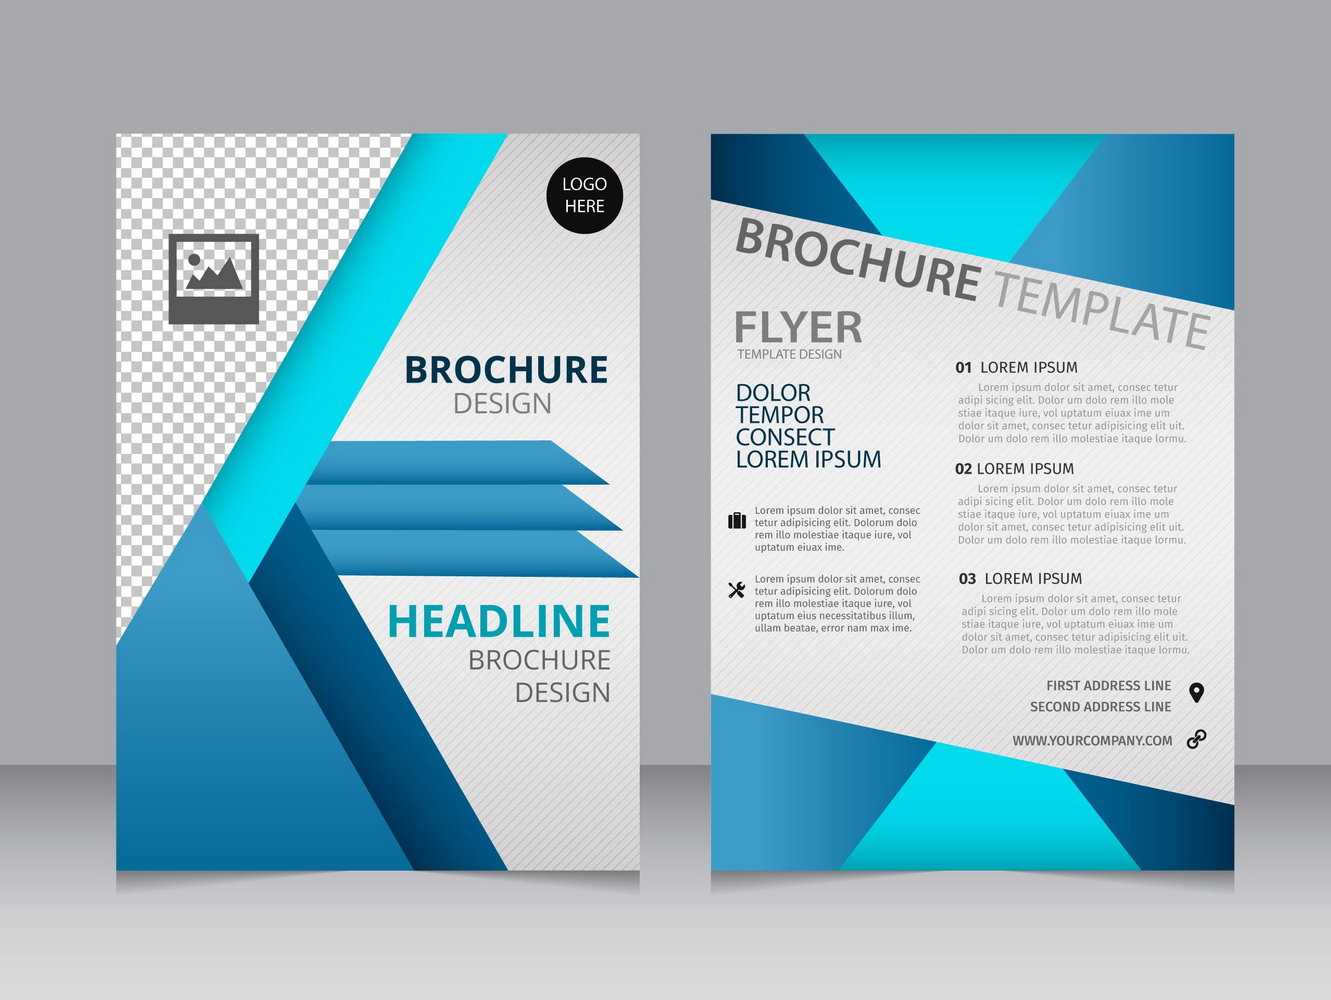 018 Brochure Templates Free Download For Microsoft Word Throughout Free Brochure Templates For Word 2010